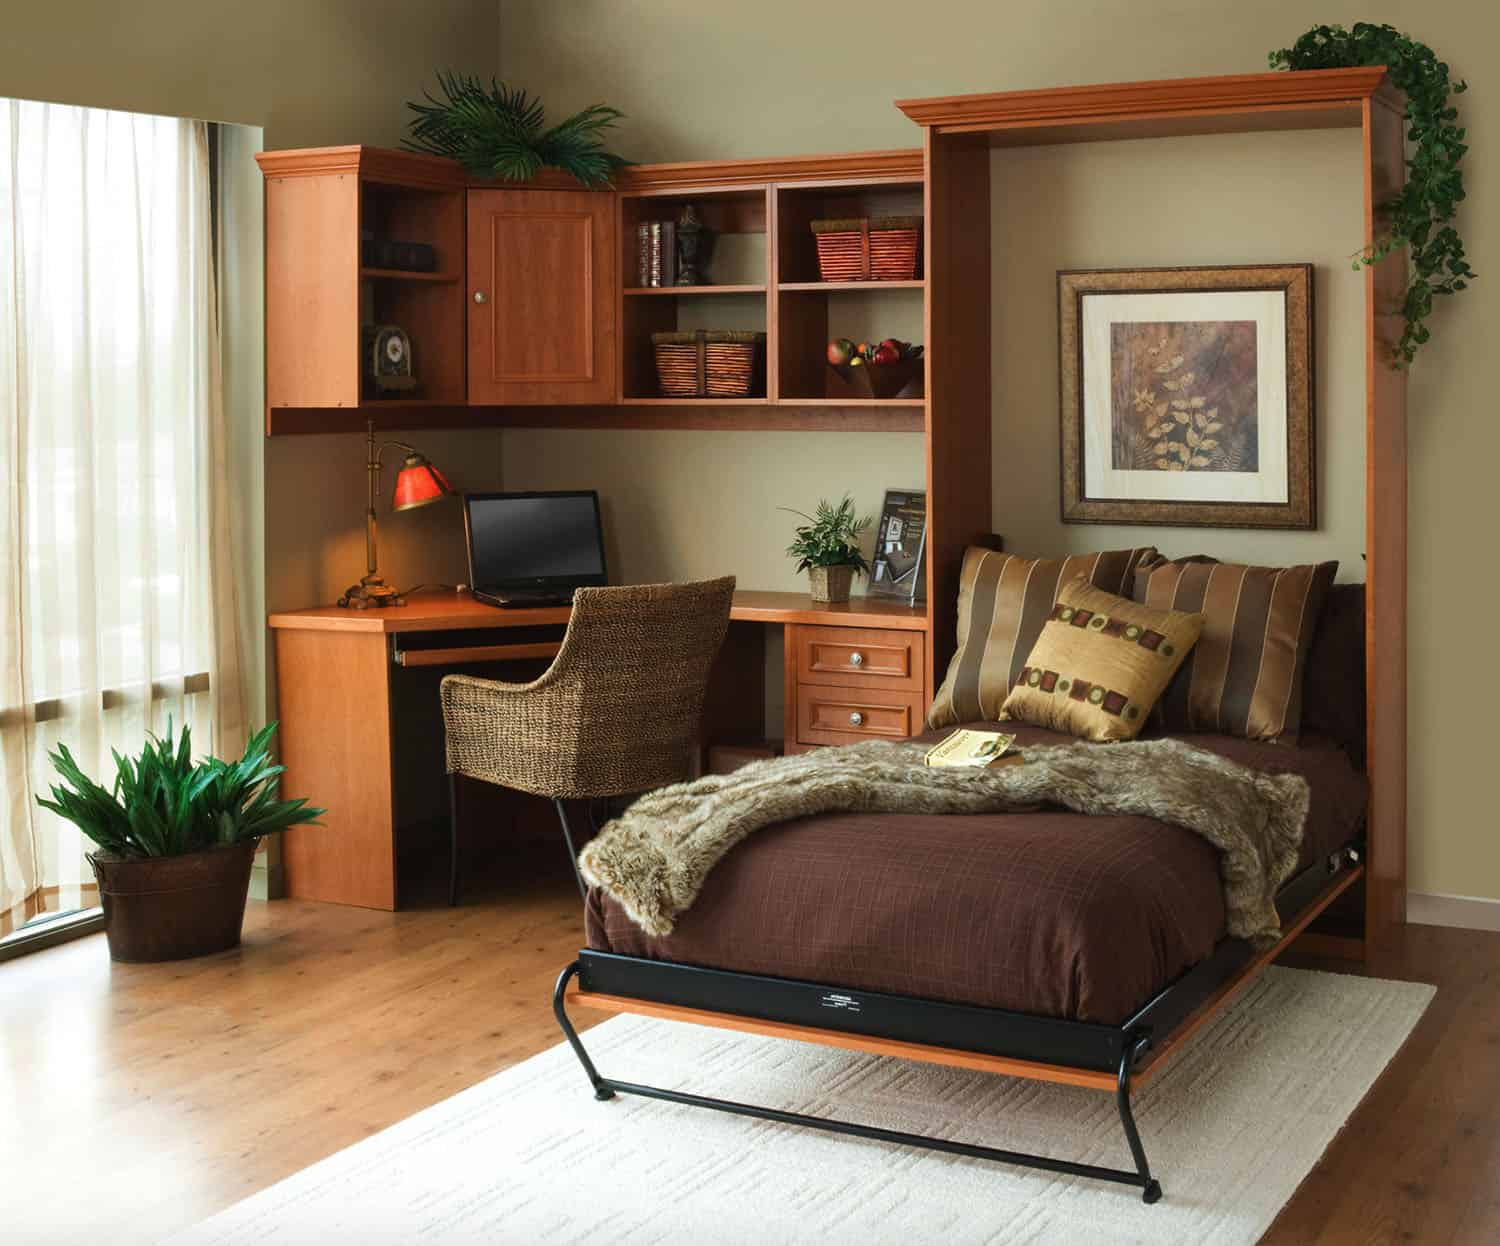 A guest room with office space